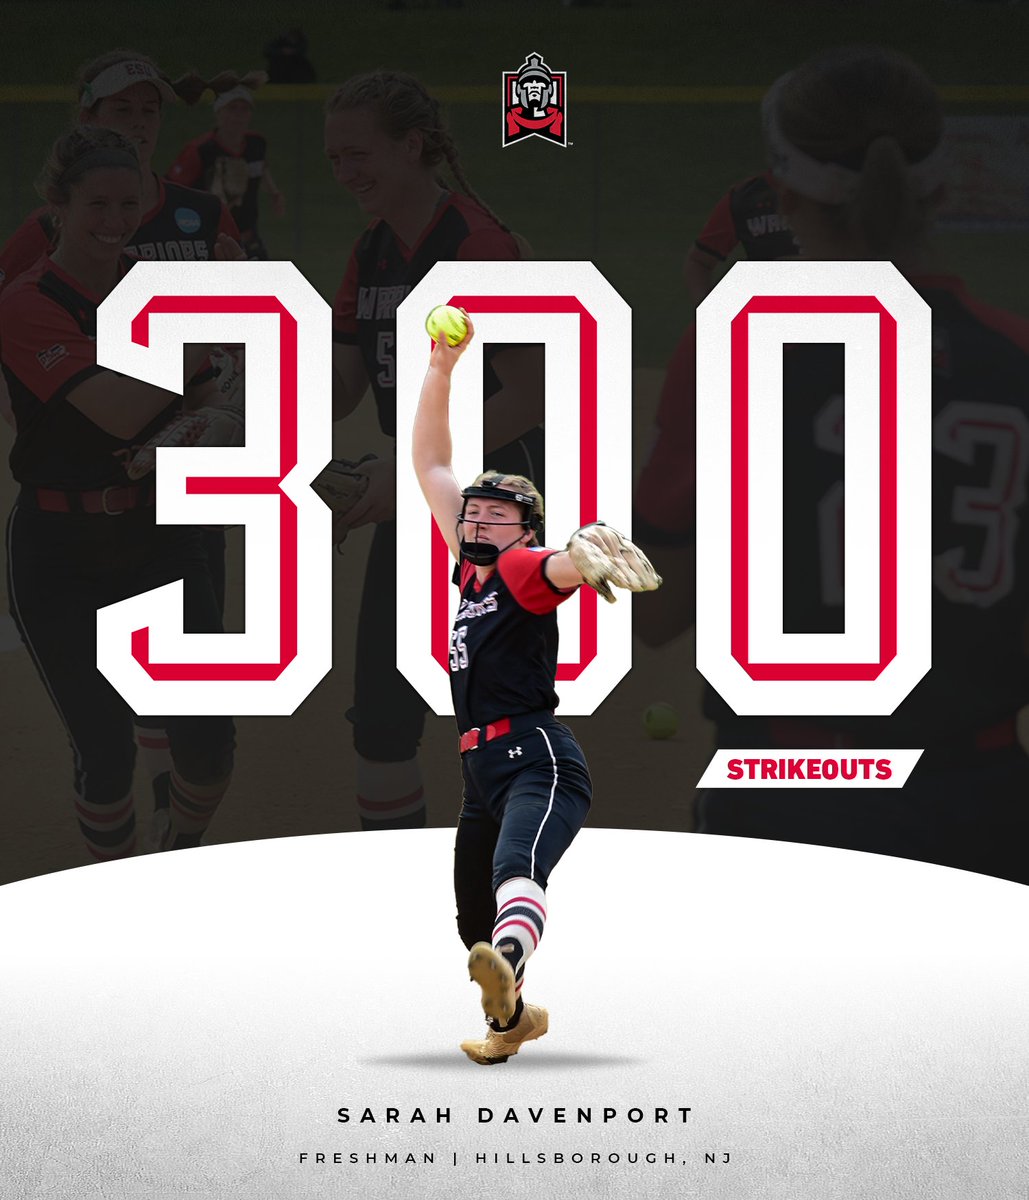 The first Warrior to register 200 strikeouts... AND THE FIRST WARRIOR TO RECORD 300 STRIKEOUTS IN A SINGLE SEASON ‼️ Sarah Davenport has tossed 302 strikeouts through 173 innings. The freshman is on another planet. @ESUSoftball x #WhereWarriorsBelong